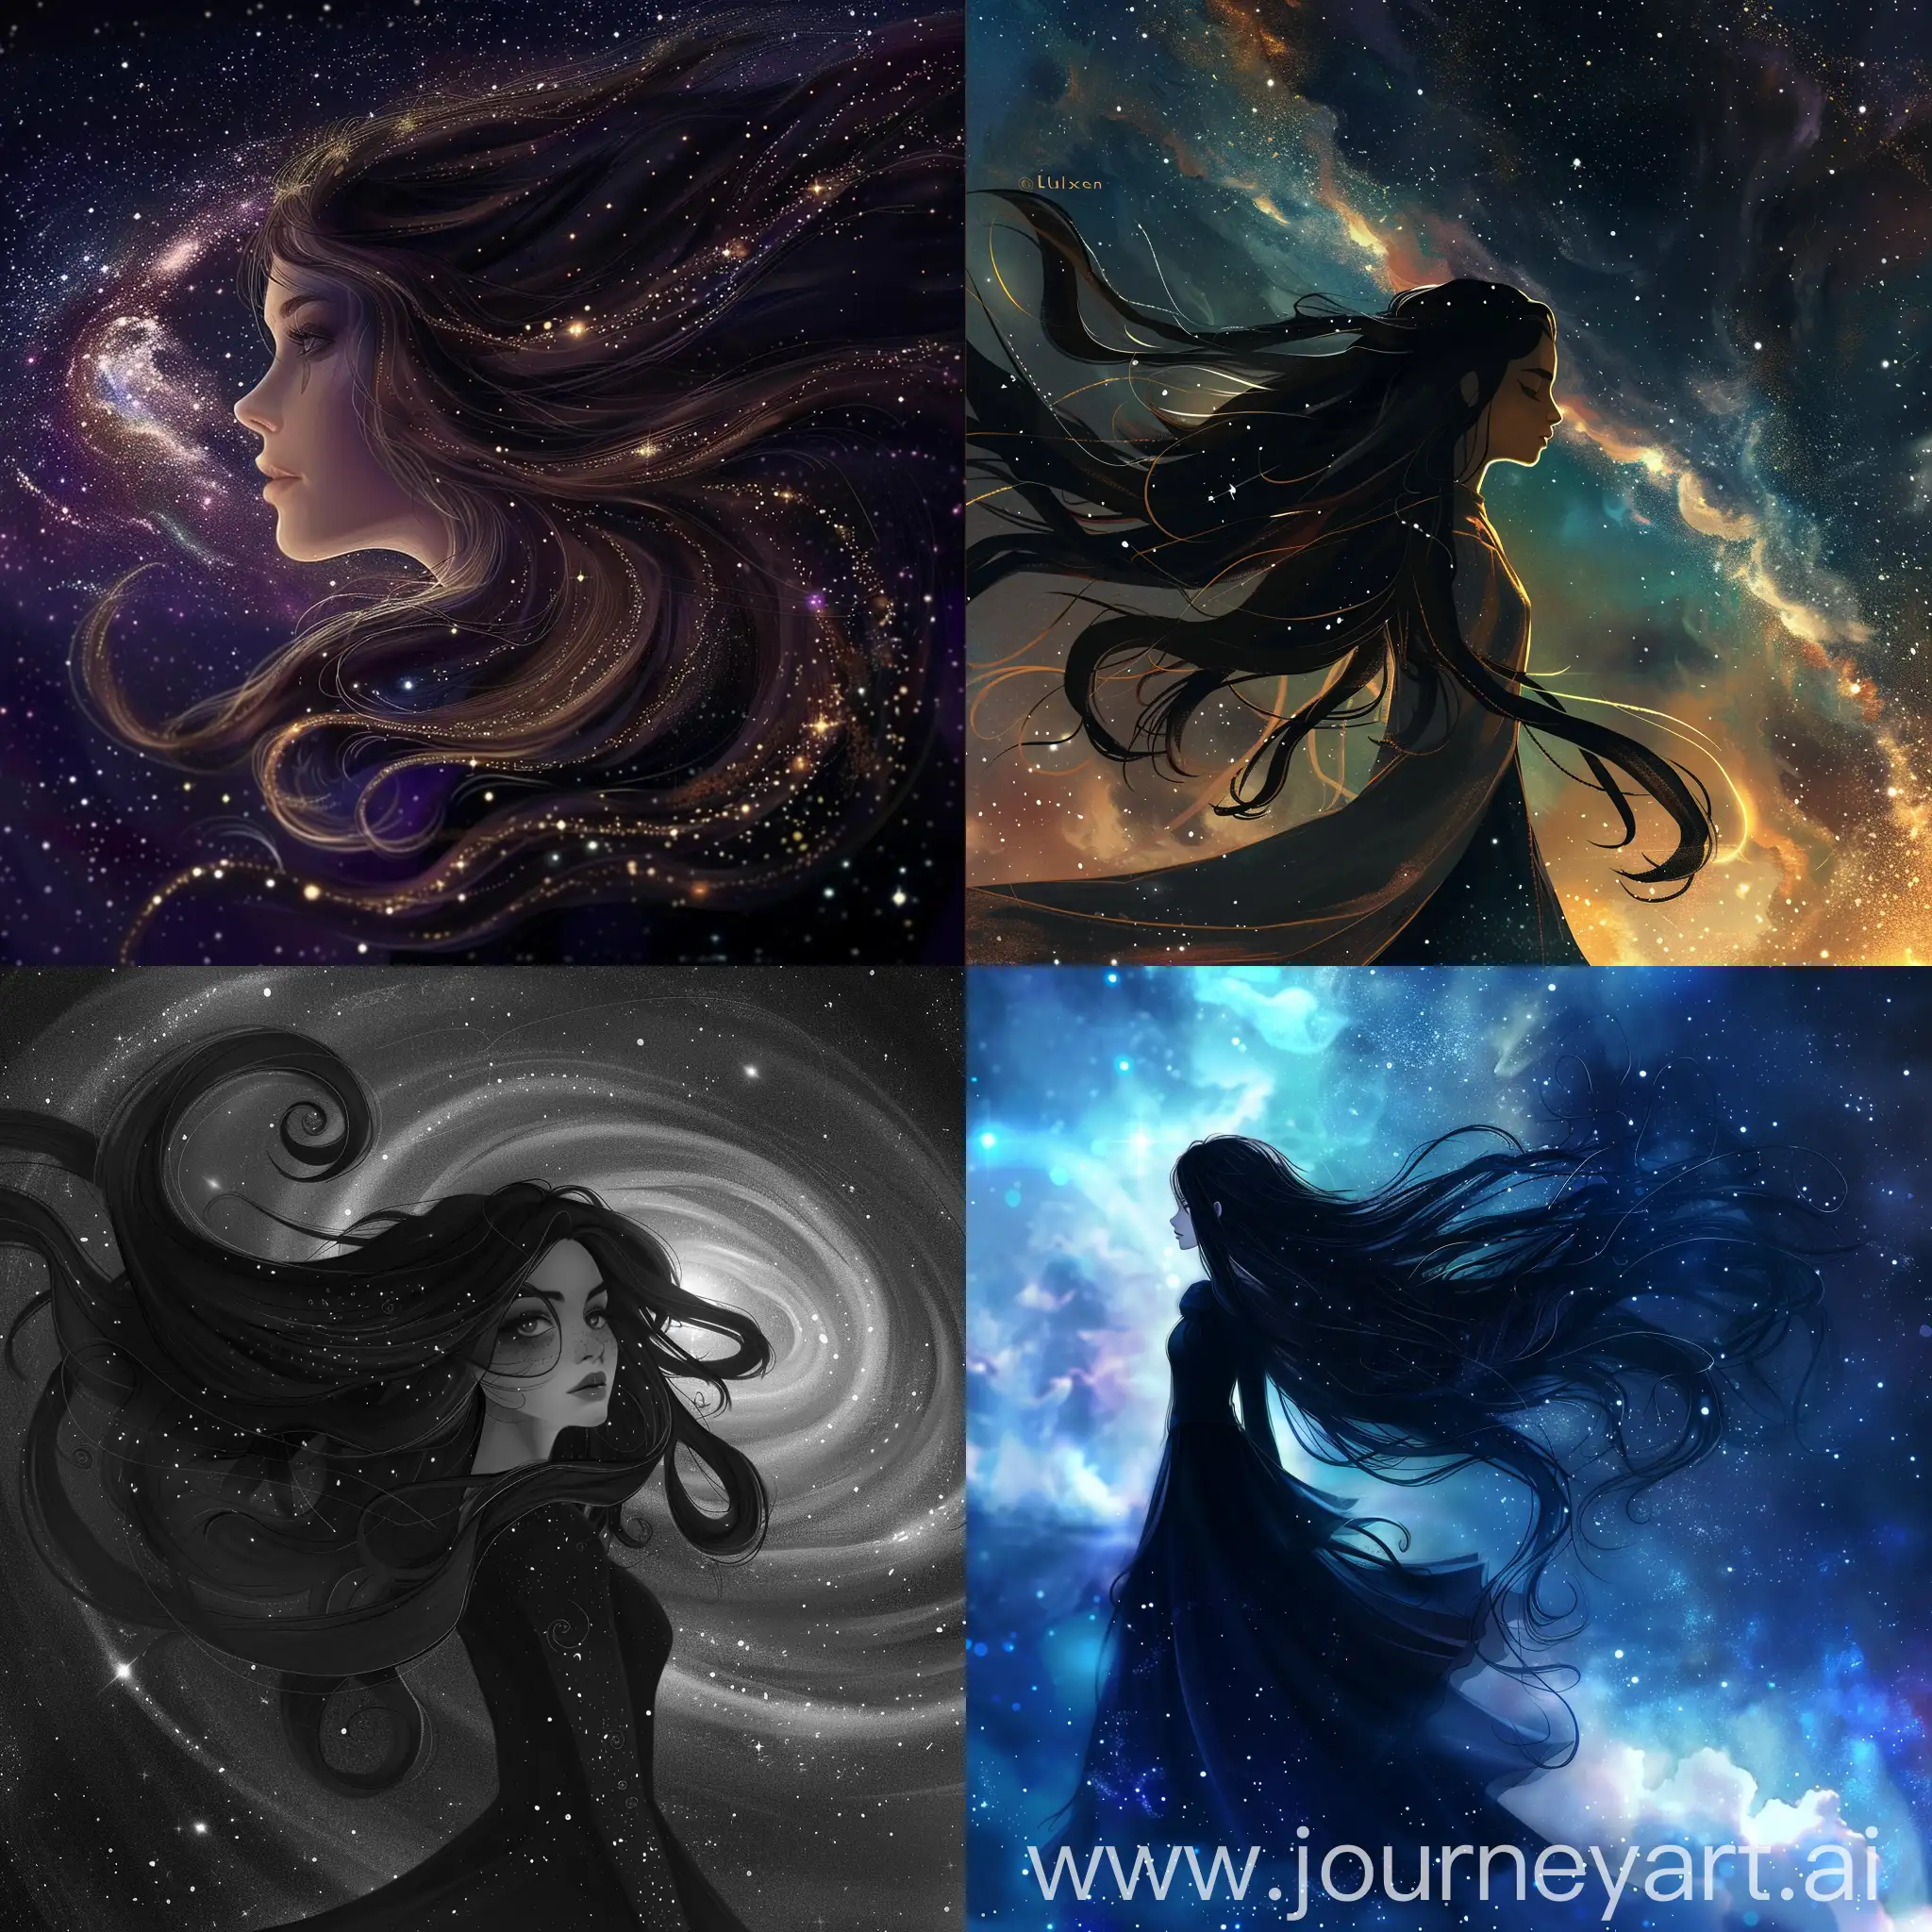 Fluxen,the goddess of the univer,stood on the edge of the galaxy,her long hair flowing in the cosmic wind.Her beauty was beyond compare,her eyes twinkling like the stars themselves.